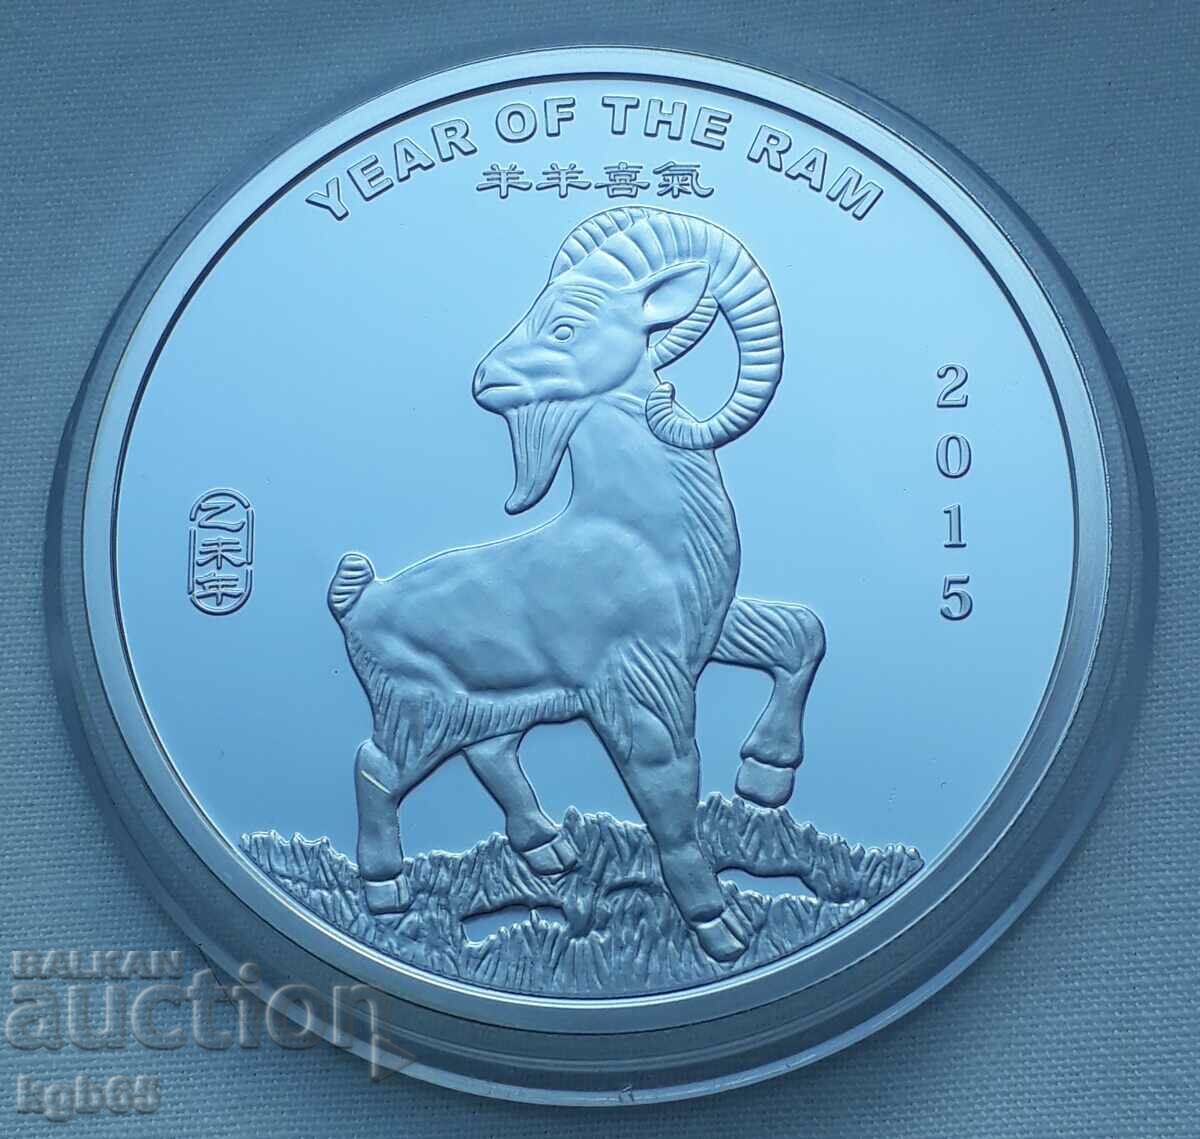 2 oz silver 2015 Year of the Goat.